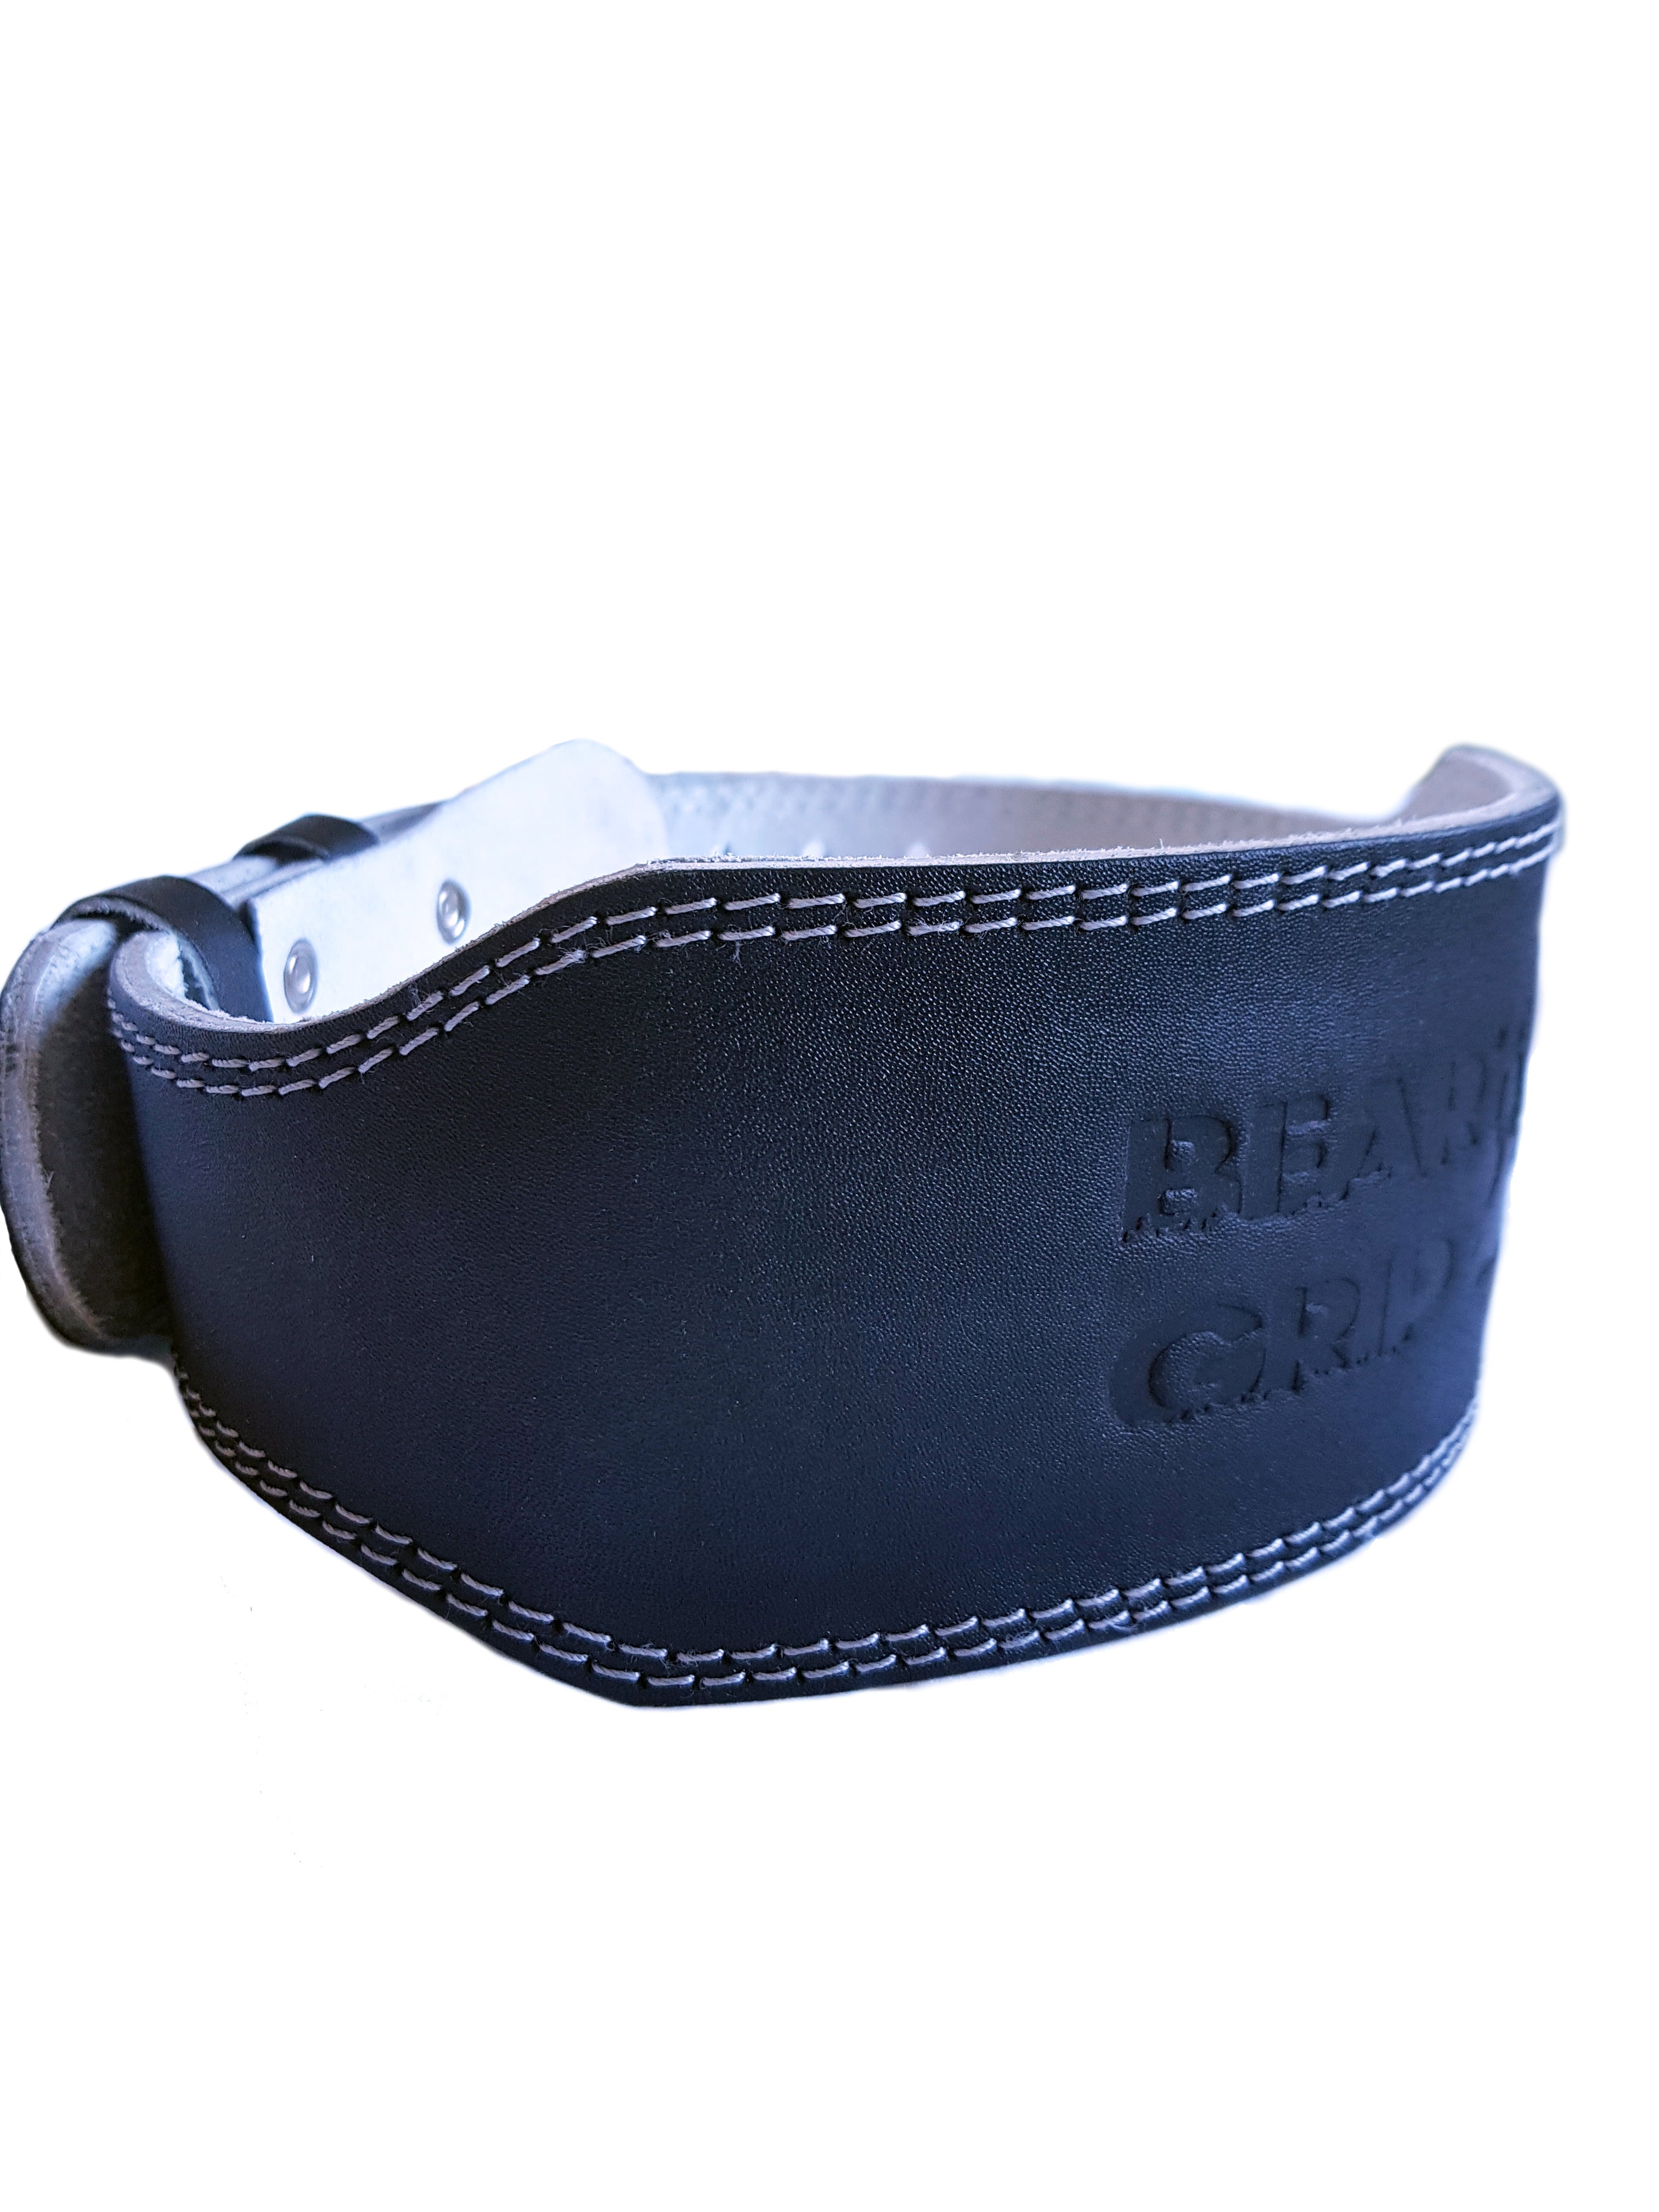 BEAR GRIP - Exercise and Lifting Belt